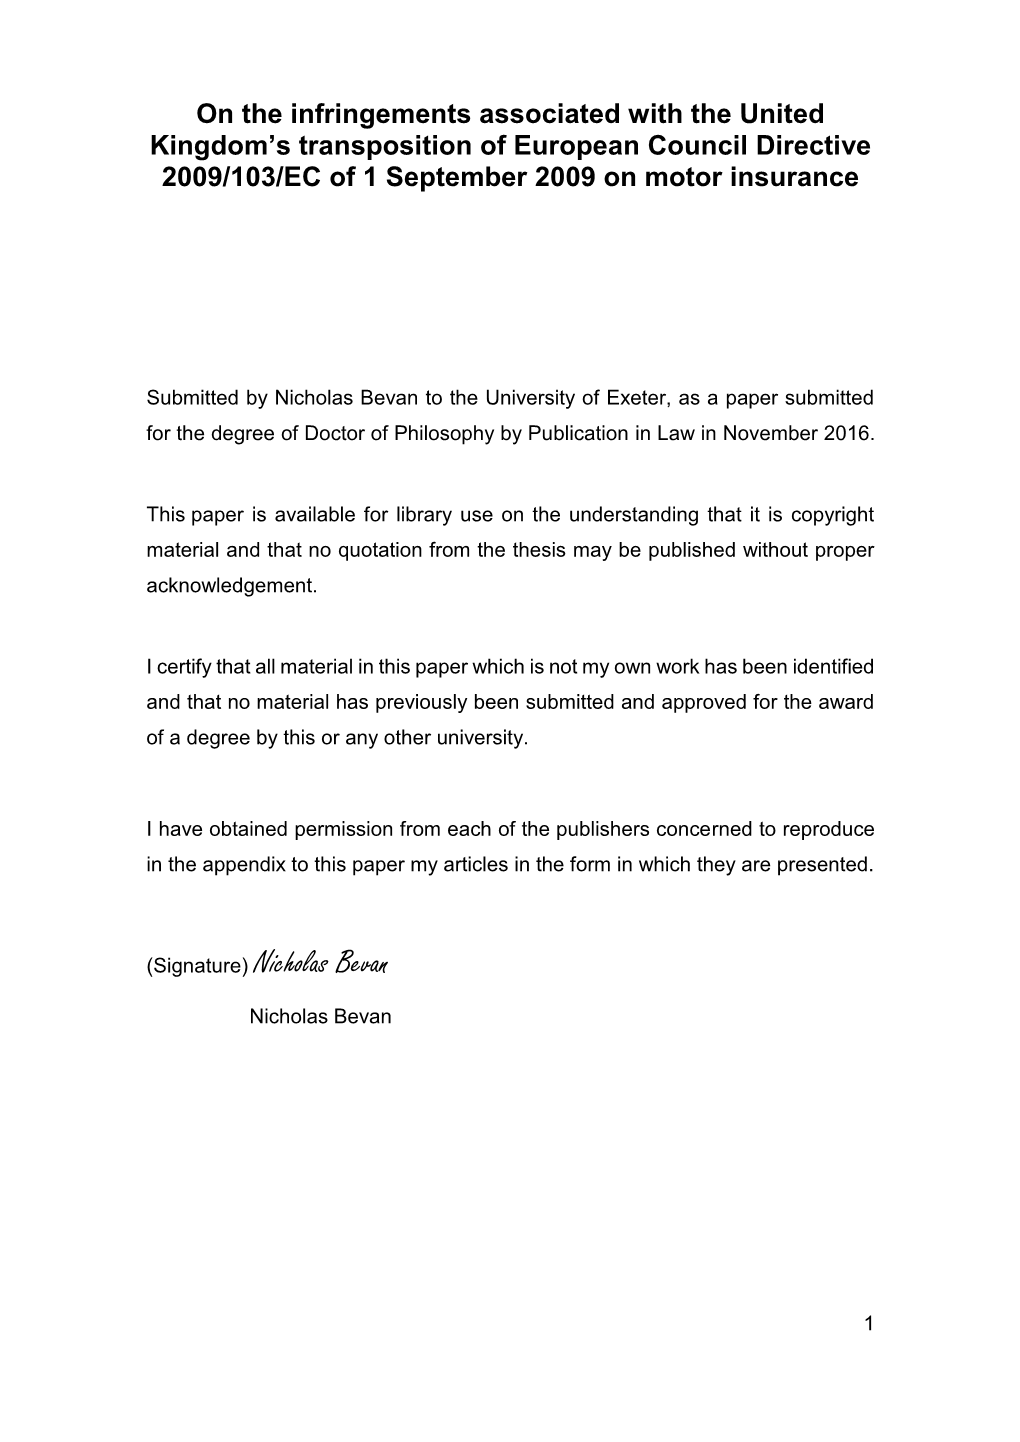 Nicholas Bevan to the University of Exeter, As a Paper Submitted for the Degree of Doctor of Philosophy by Publication in Law in November 2016